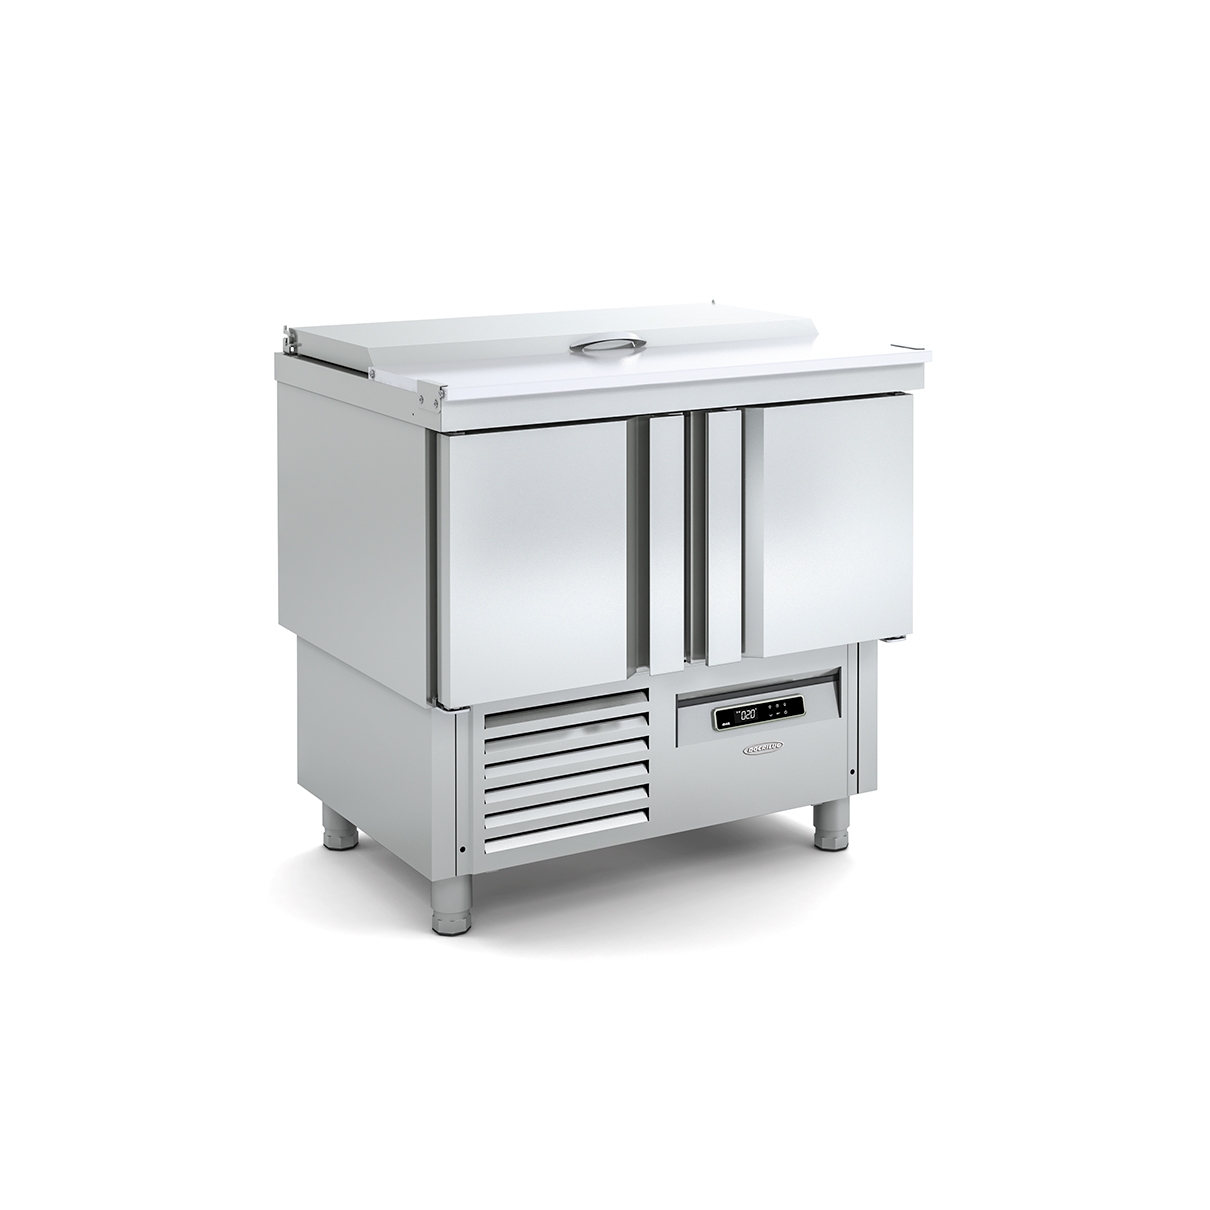 Gastronorm 1/1 Refrigerated Table for Food Preparation MS